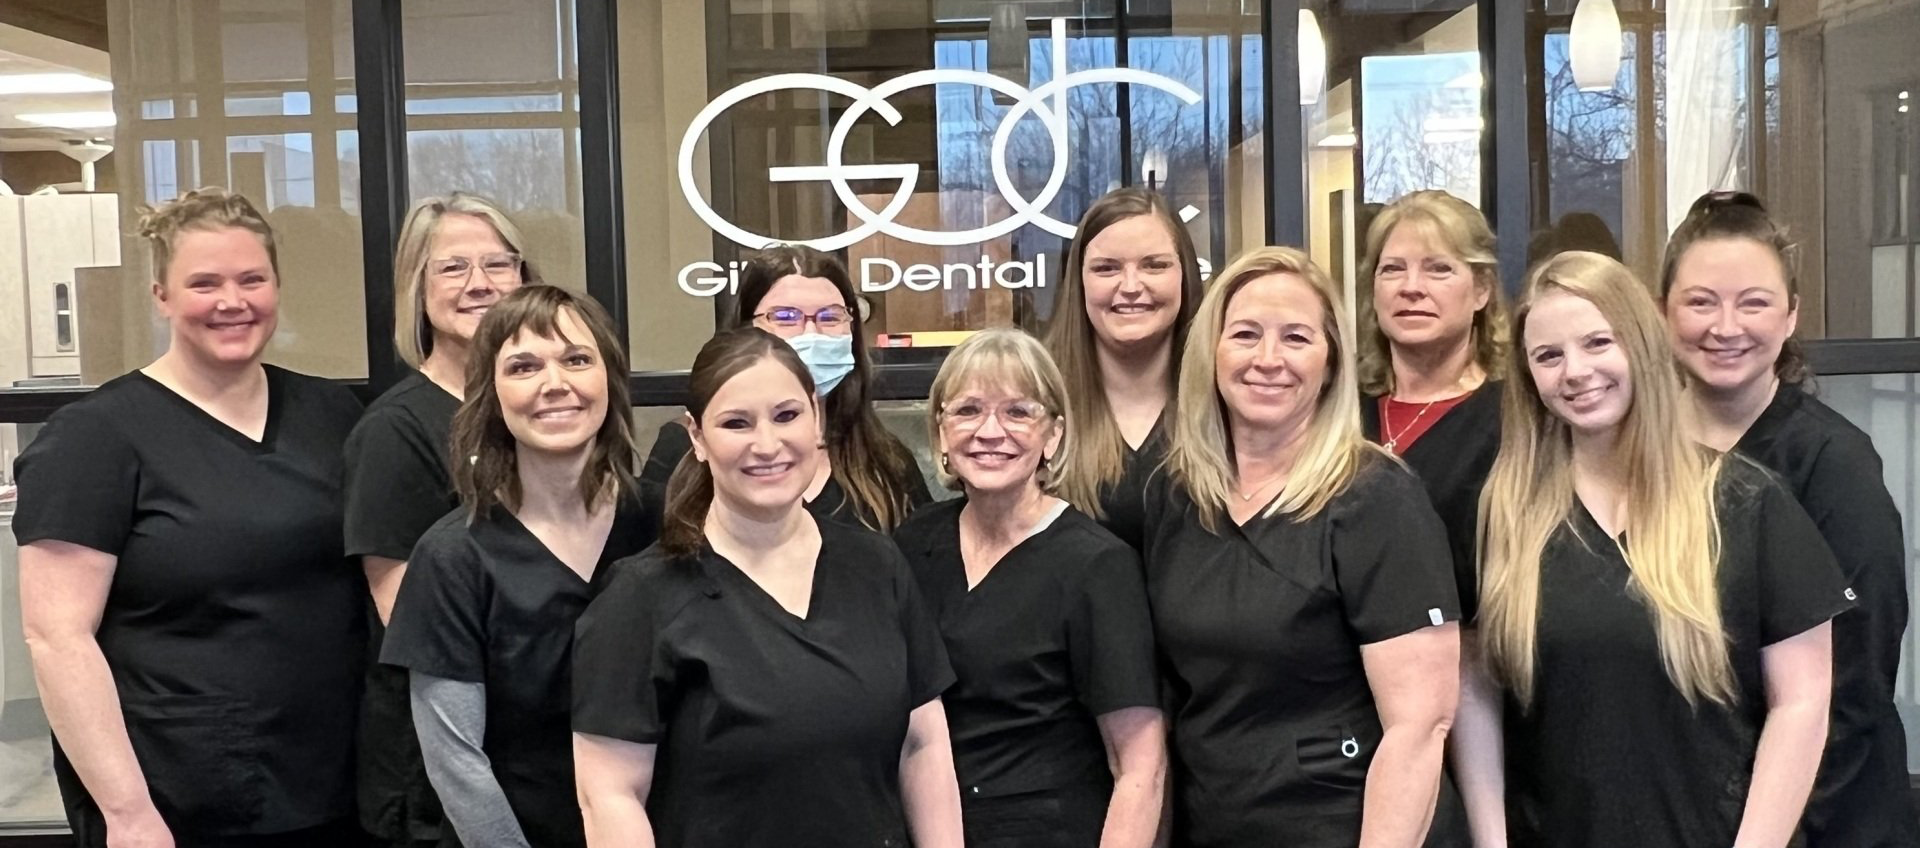 Dental Staff at Top Dentist in Overland Park 66221 | Crowns, Bridges, Whitening, Clear Aligners, Wisdom Teeth Extractions